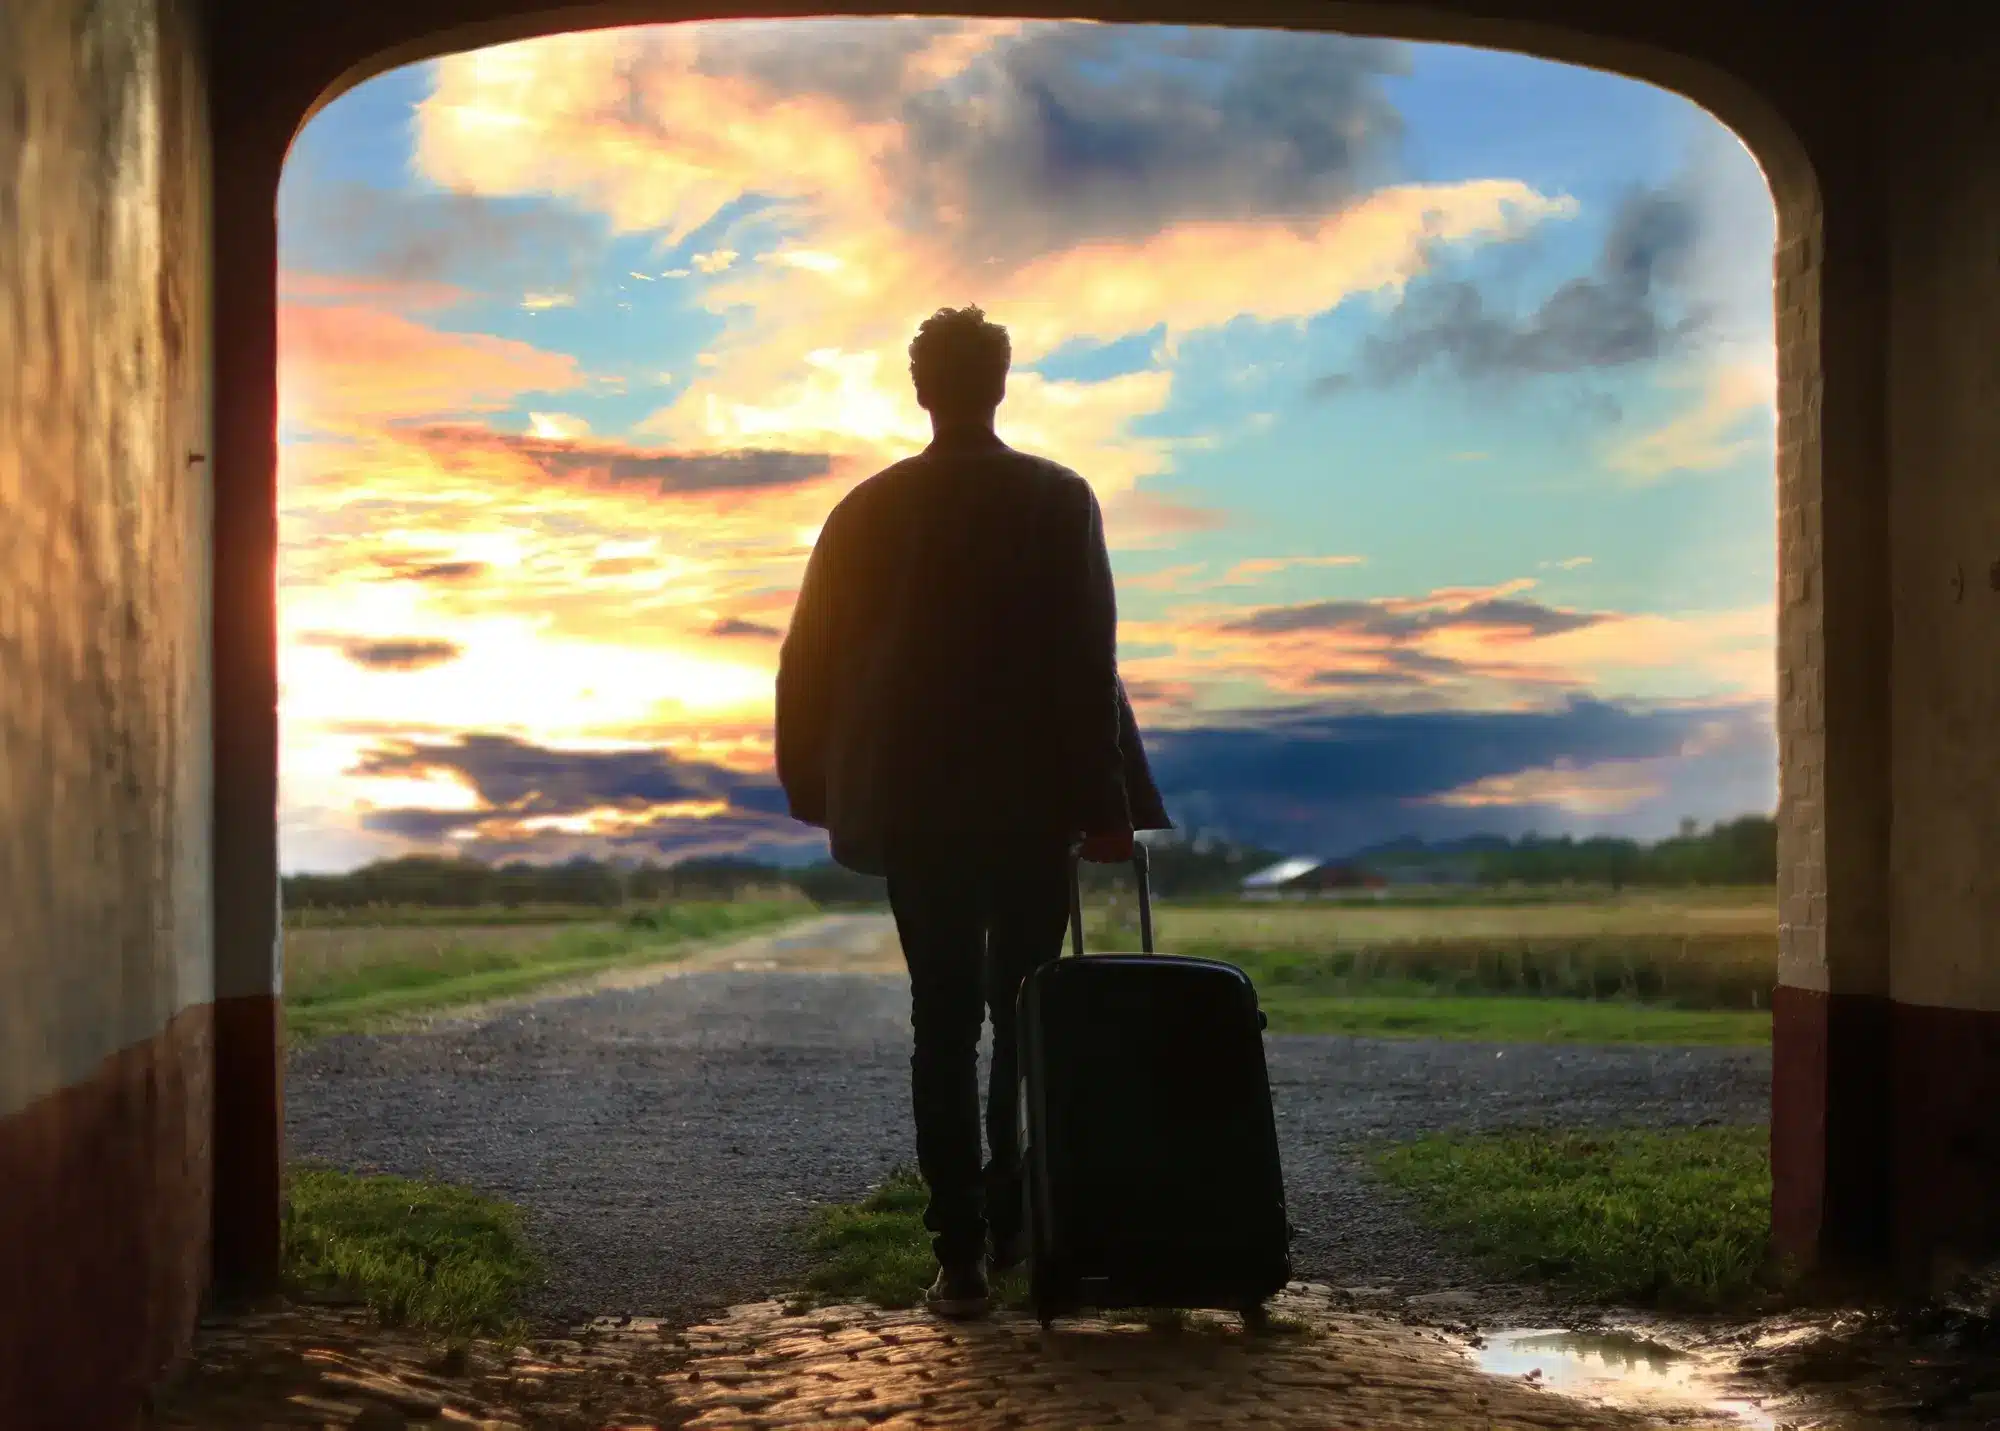 A man pulling a luggage through a tunnel that exits into a scenic view, representing the concept of working holiday maker.